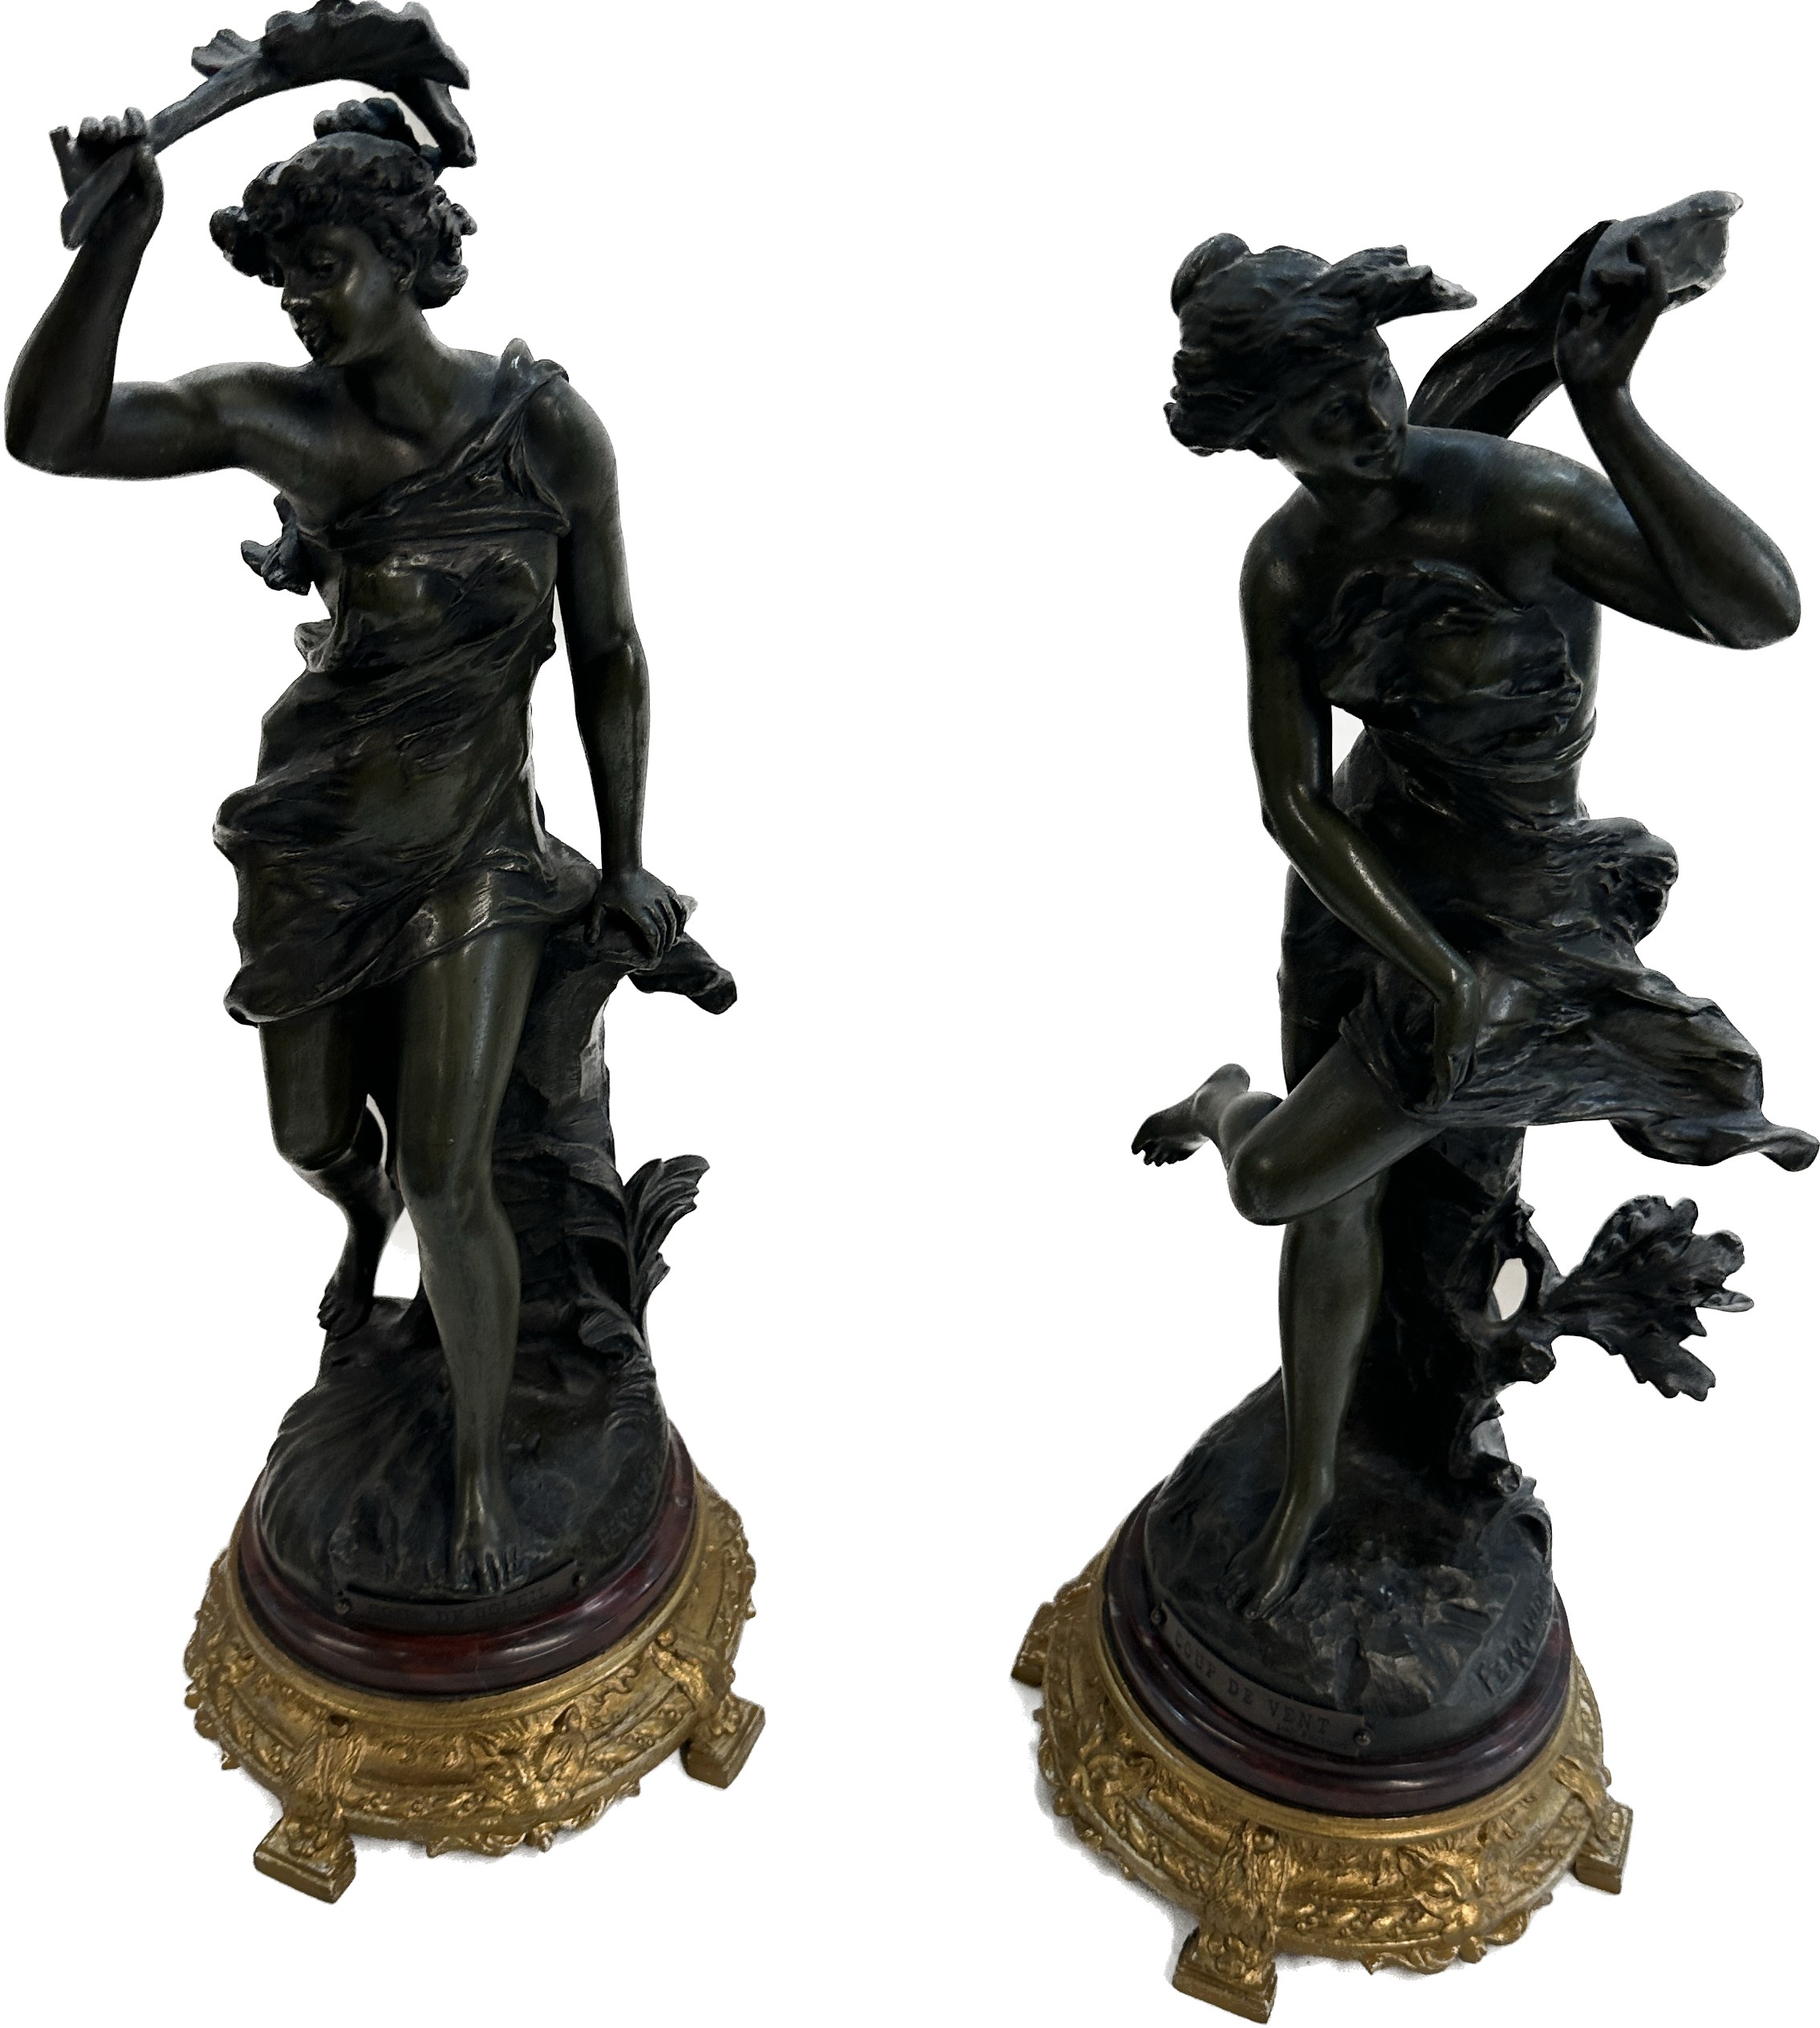 Pair of decorative figures on a base 17 inches tall